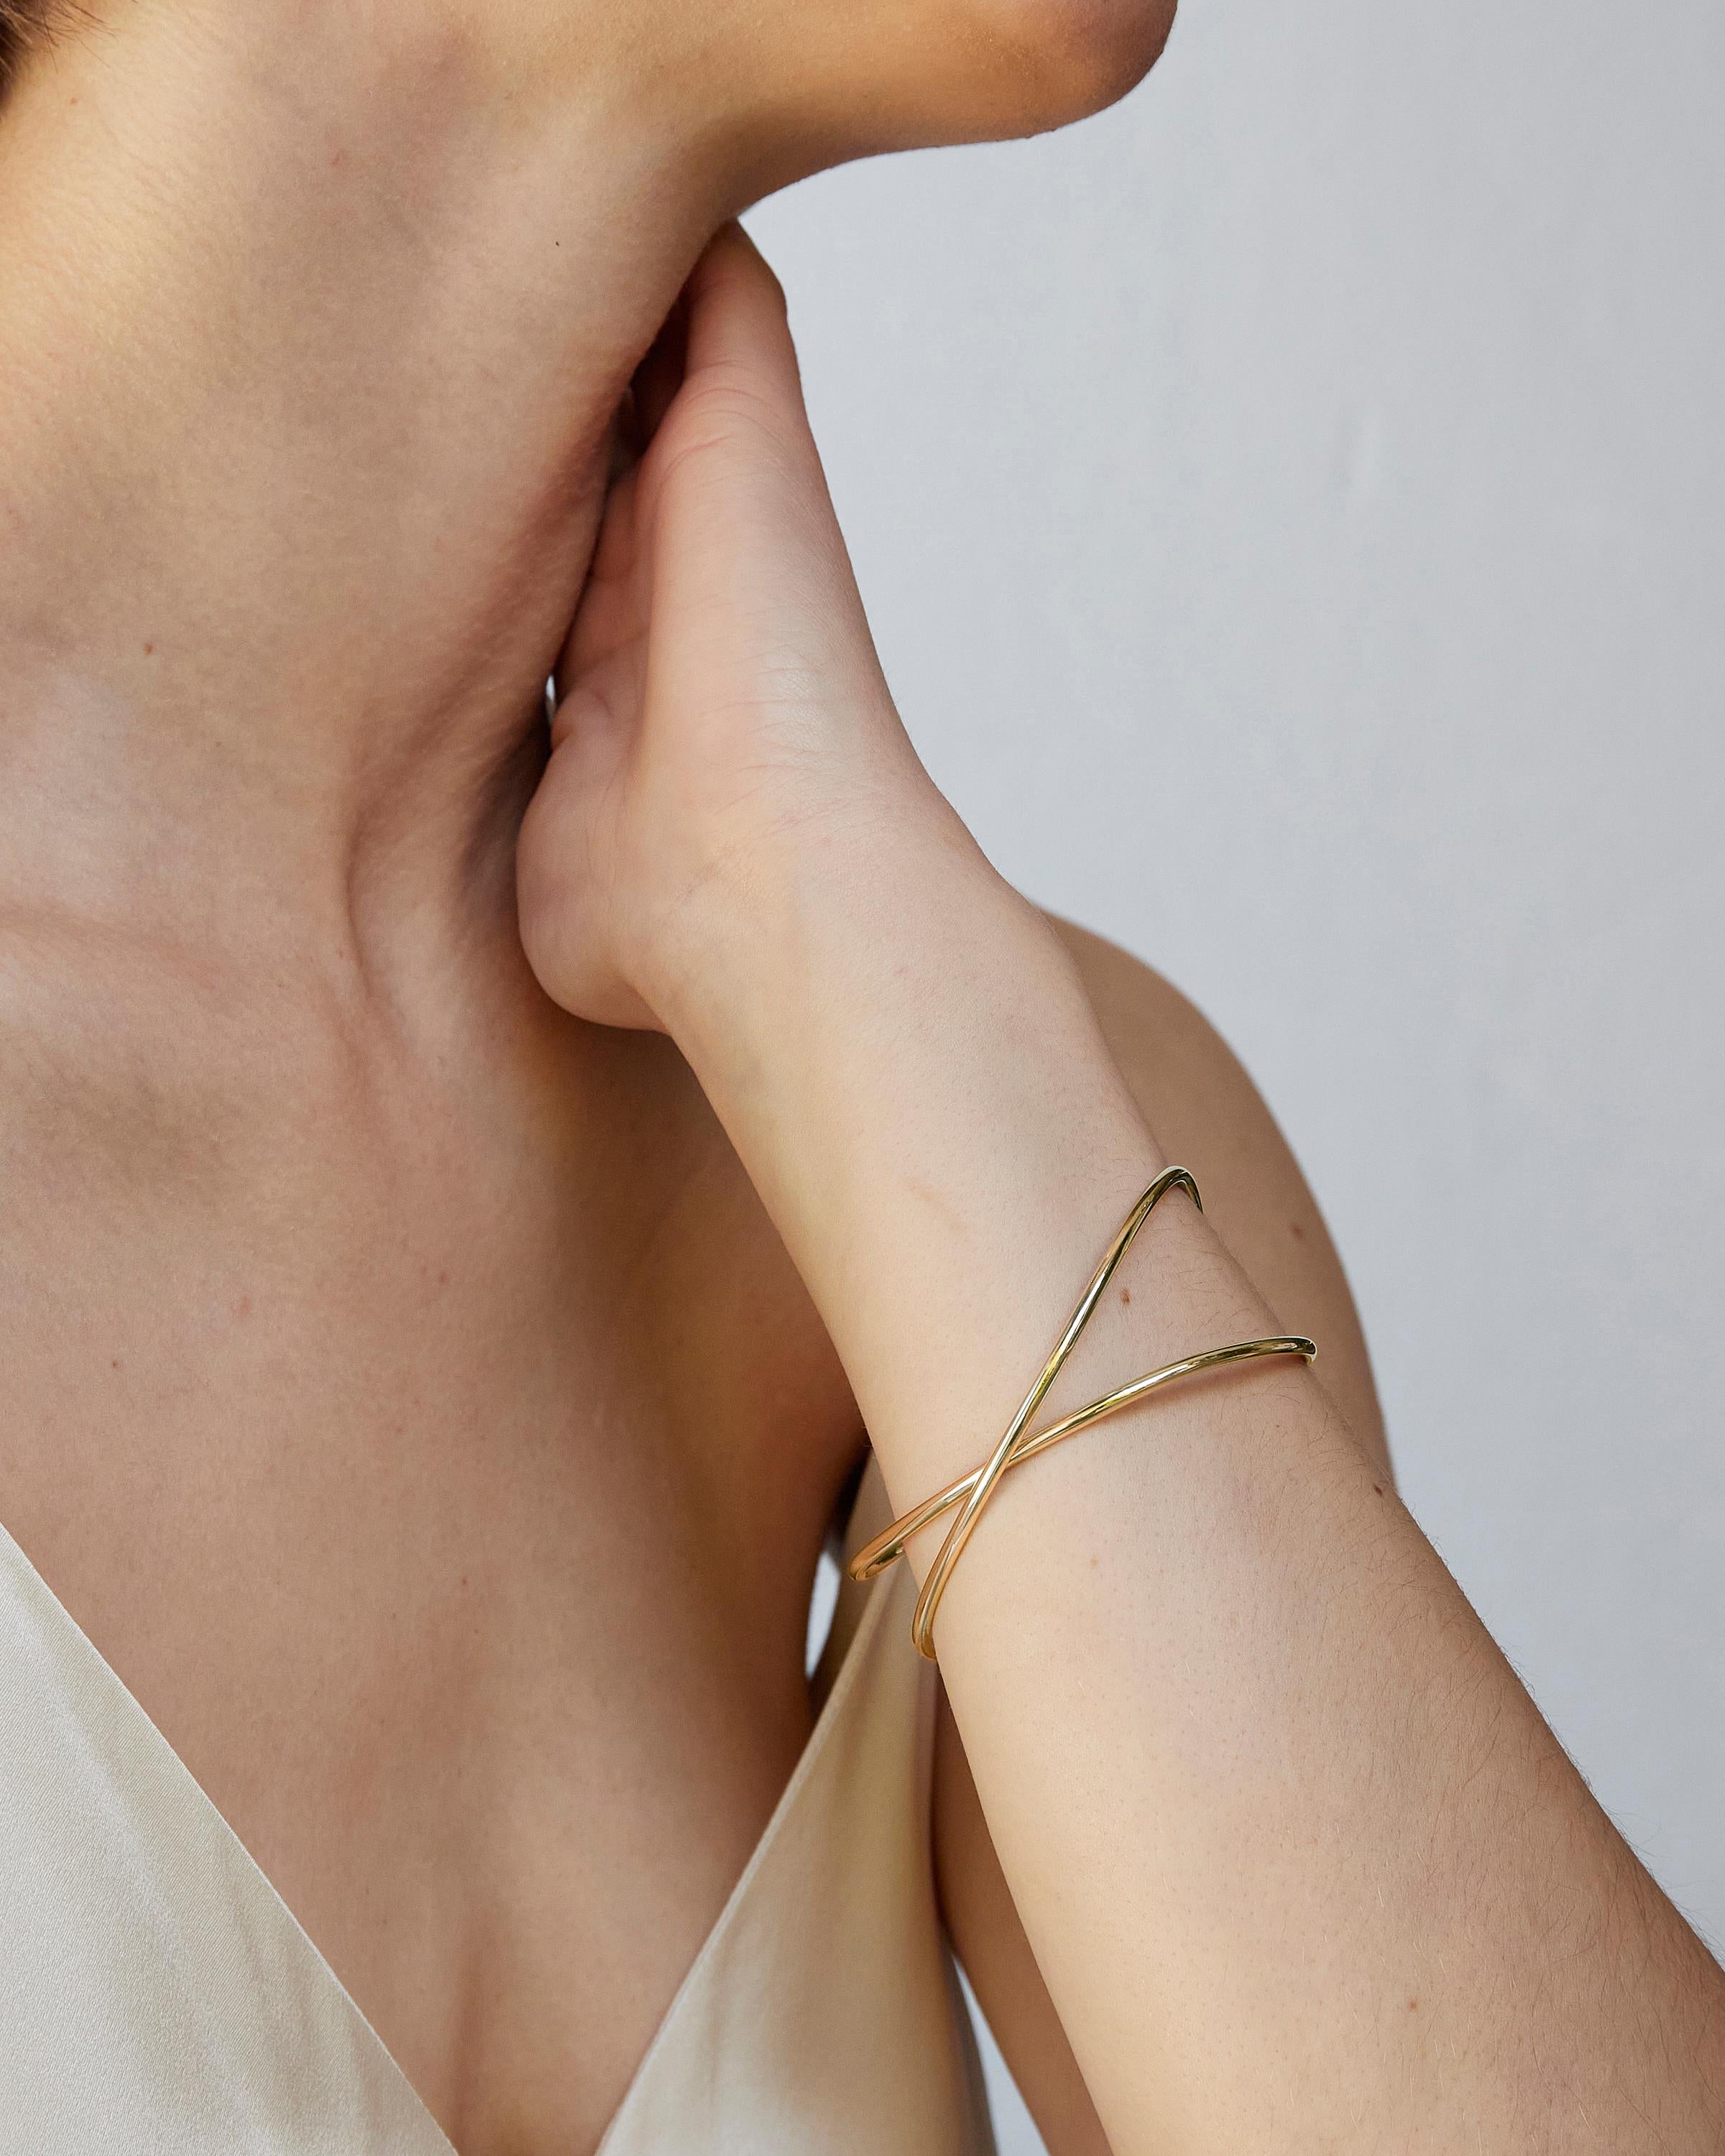 BAR Jewellery, London UK, TIDE BRACELET, Gold Plates Brass 

A bold, sculptural bracelet that balances angular and fluid lines. Inspired by modernist sculpture.

Recycled brass with 18 Carat Gold plating

One size - Carefully applied pressure will